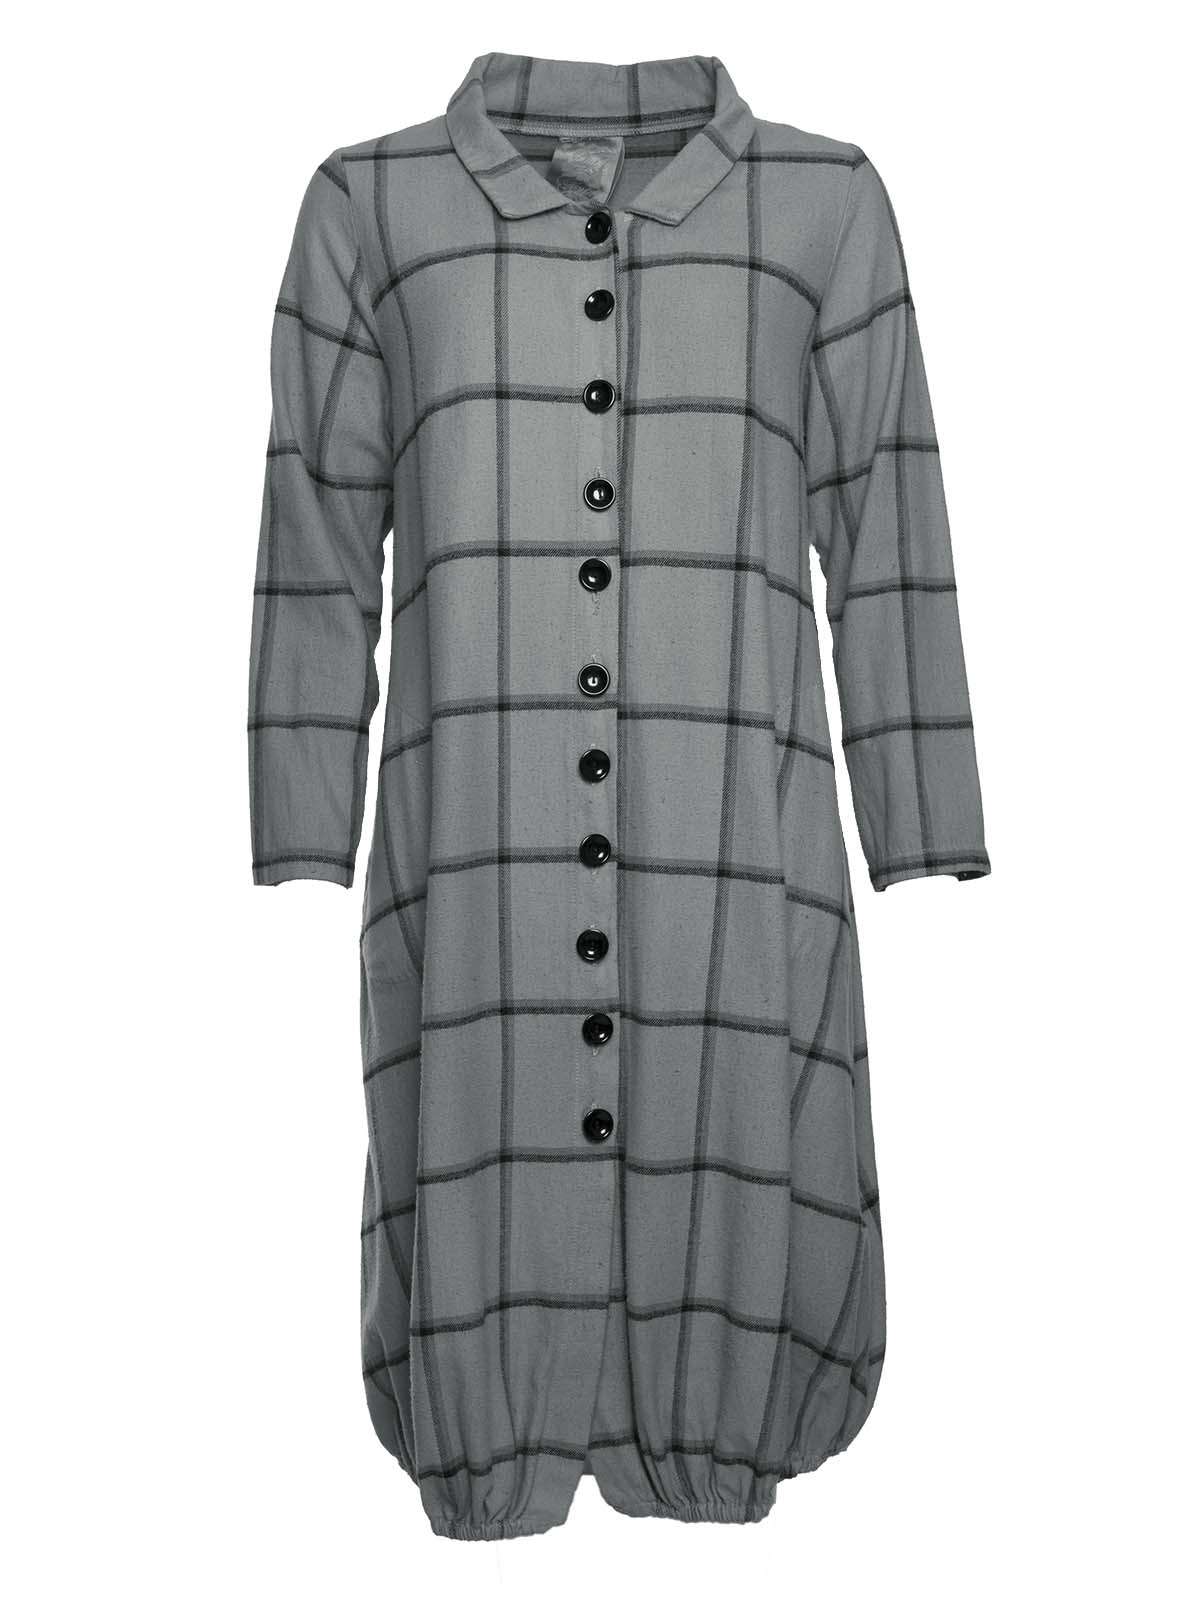 Out of Xile Button Coat Dress 57v Silver